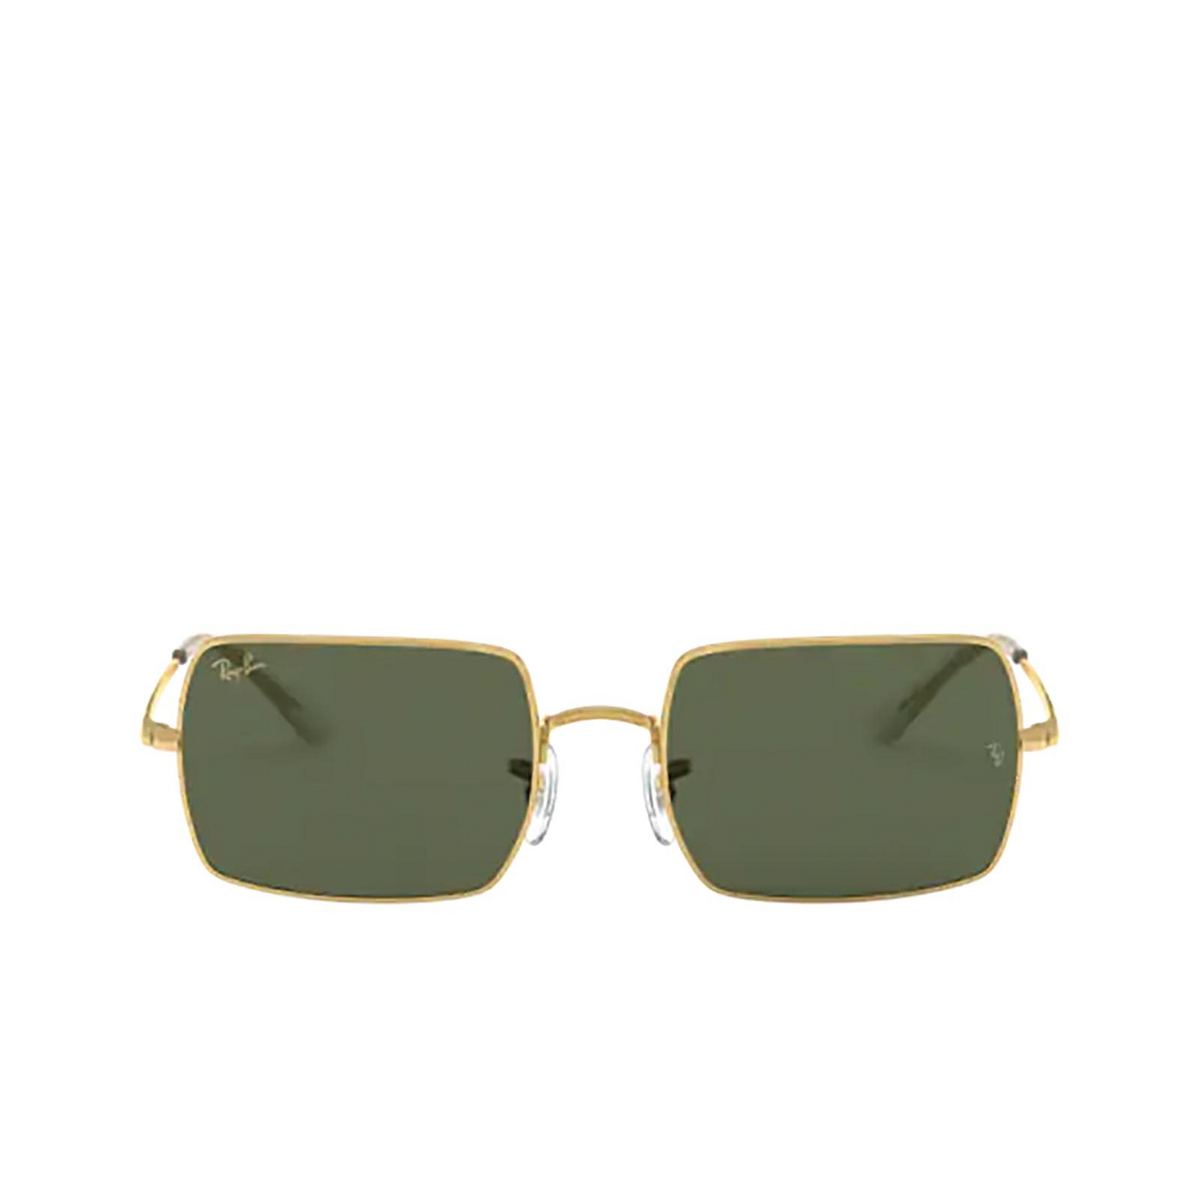 Ray-Ban RECTANGLE Sunglasses 919631 LEGEND GOLD - front view